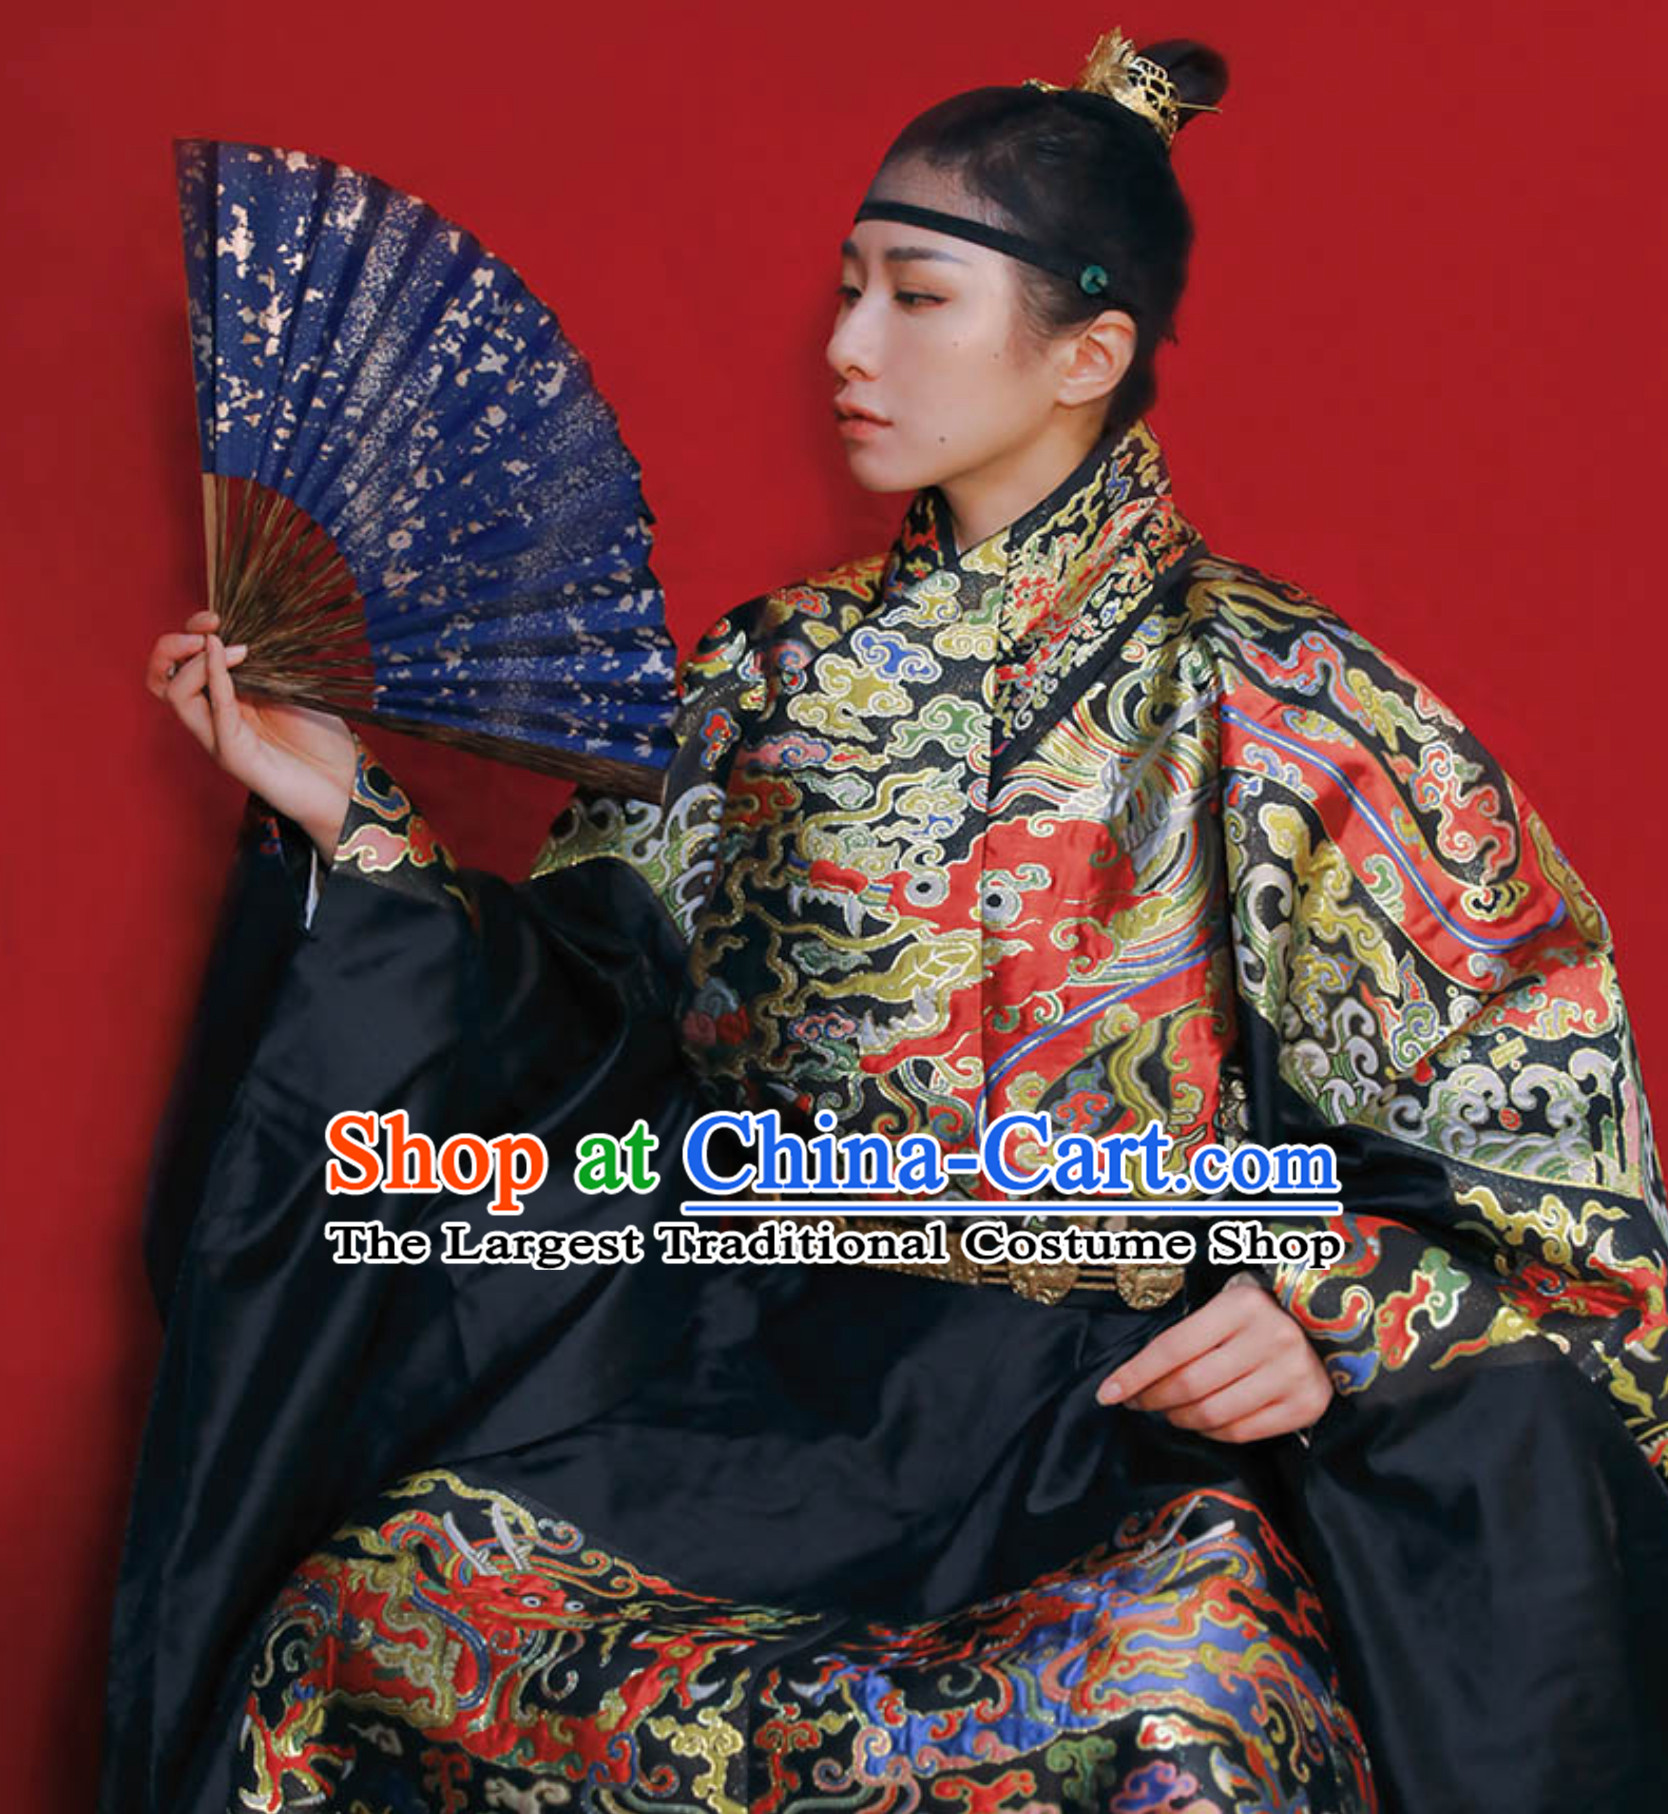 Ancient China Ming Dynasty Imperial Bodyguard Embroidered Fei Yu Garment Fly Fish Clothing for Men